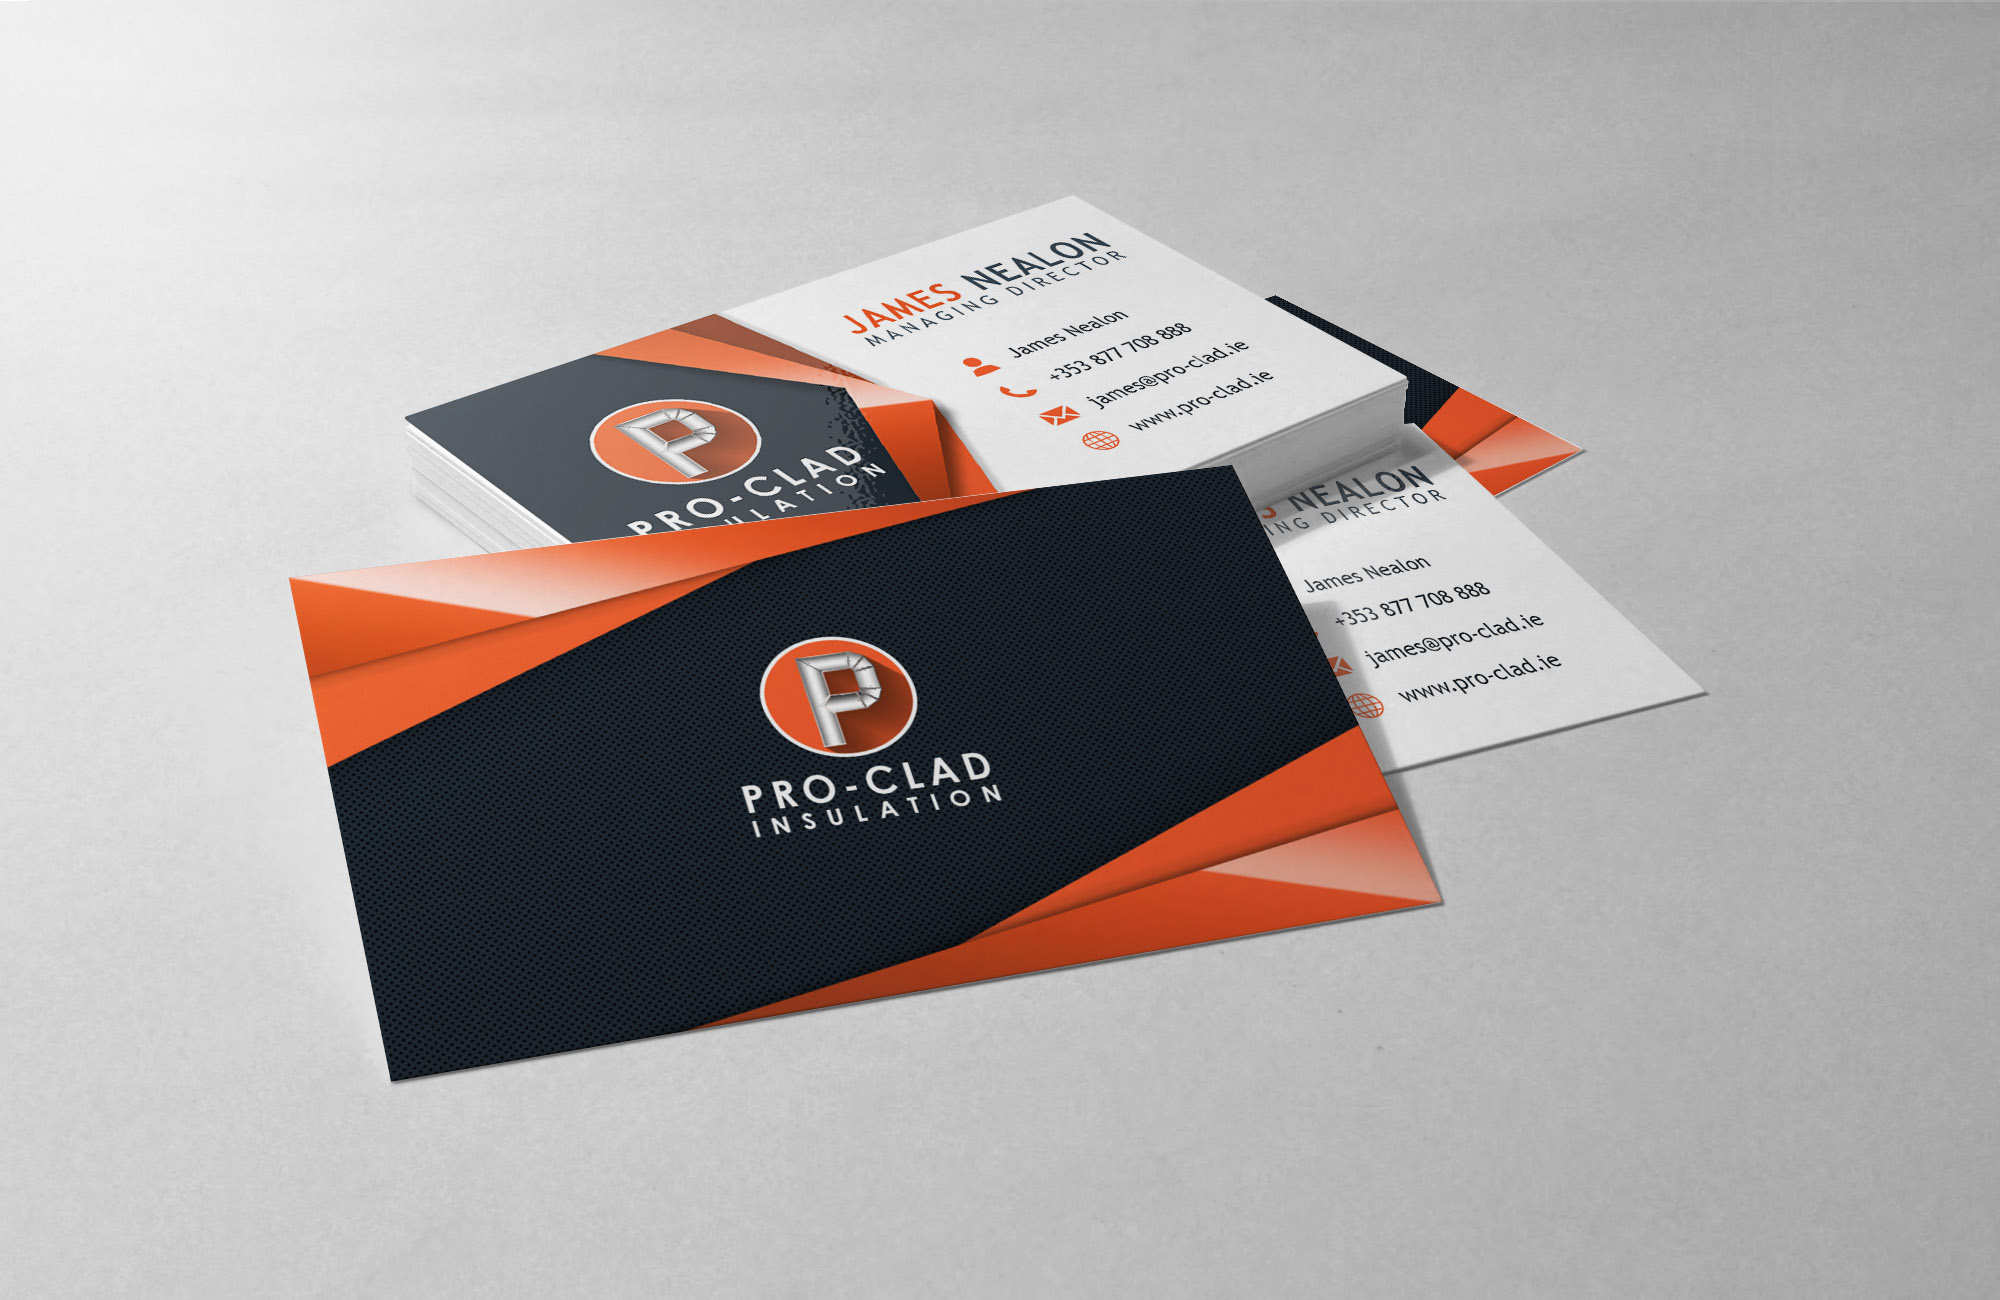 Pro-Clad Business Cards